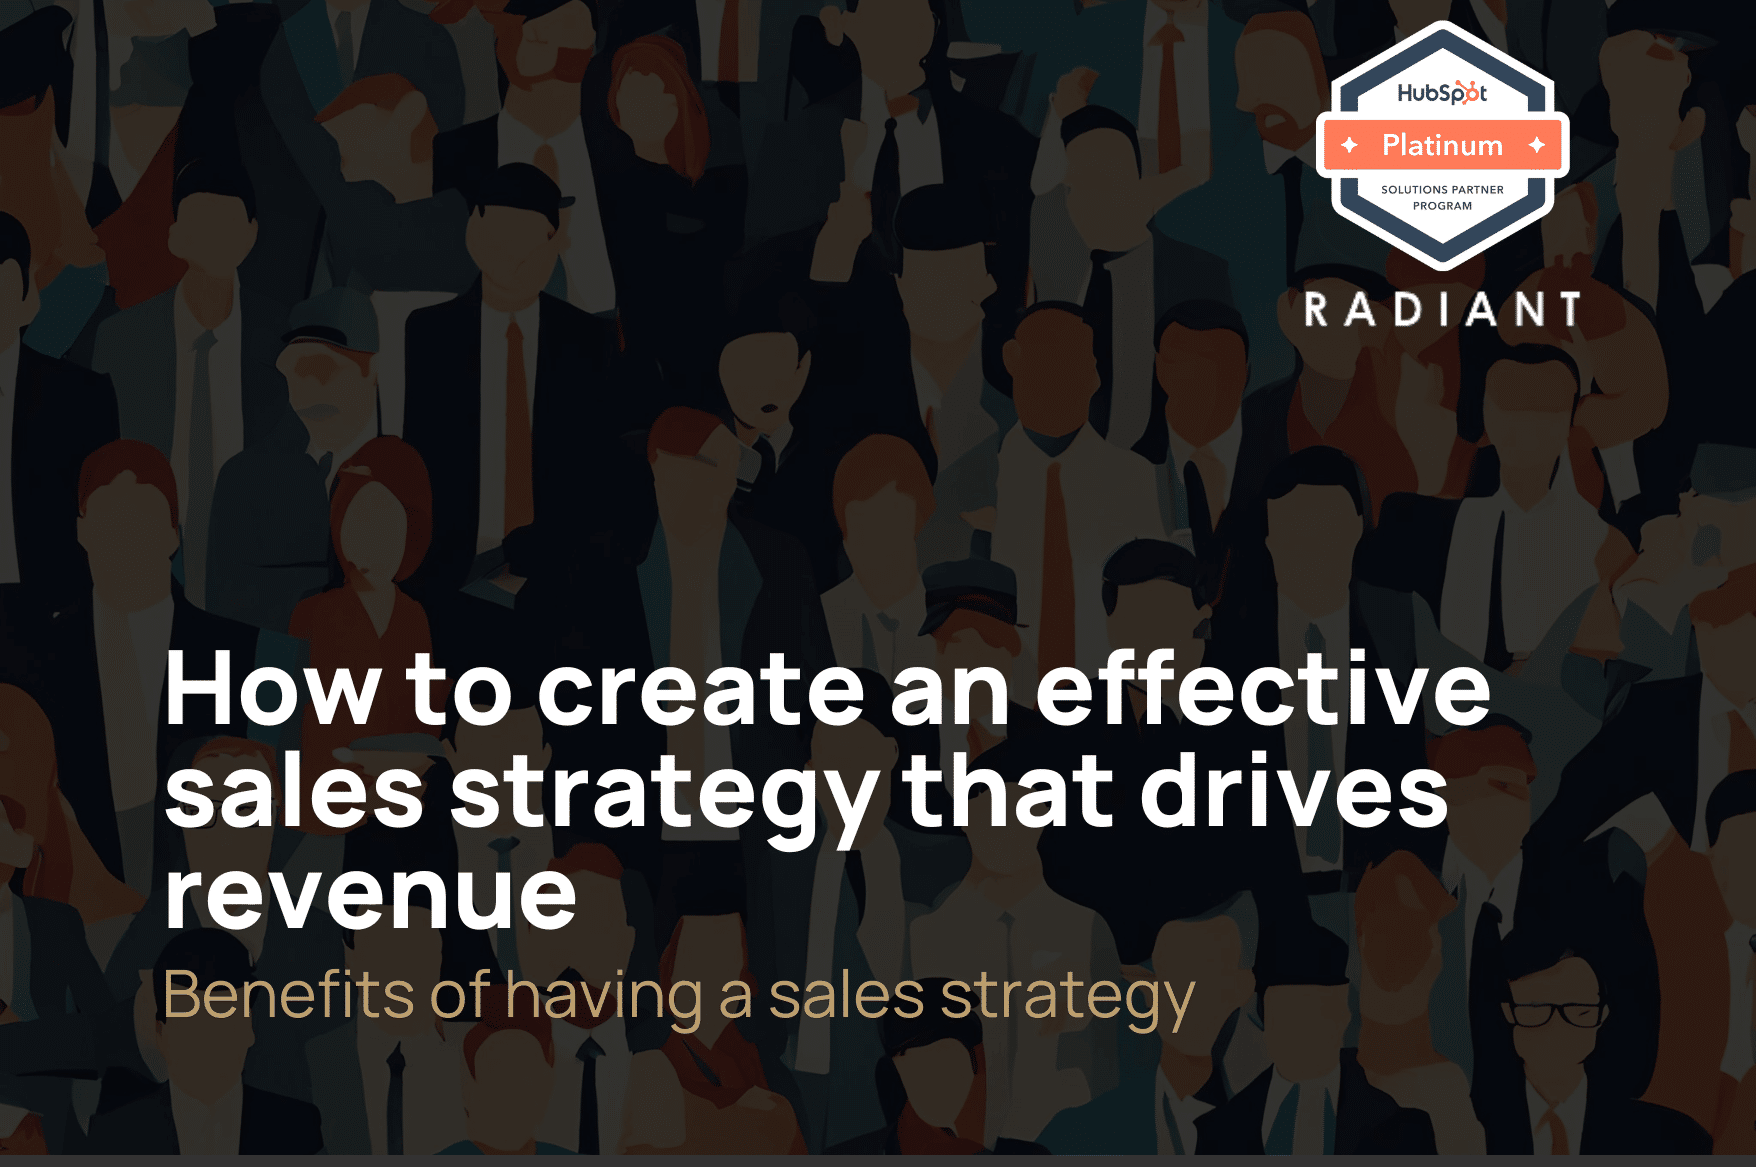 How to create an effective sales strategy that drives revenue